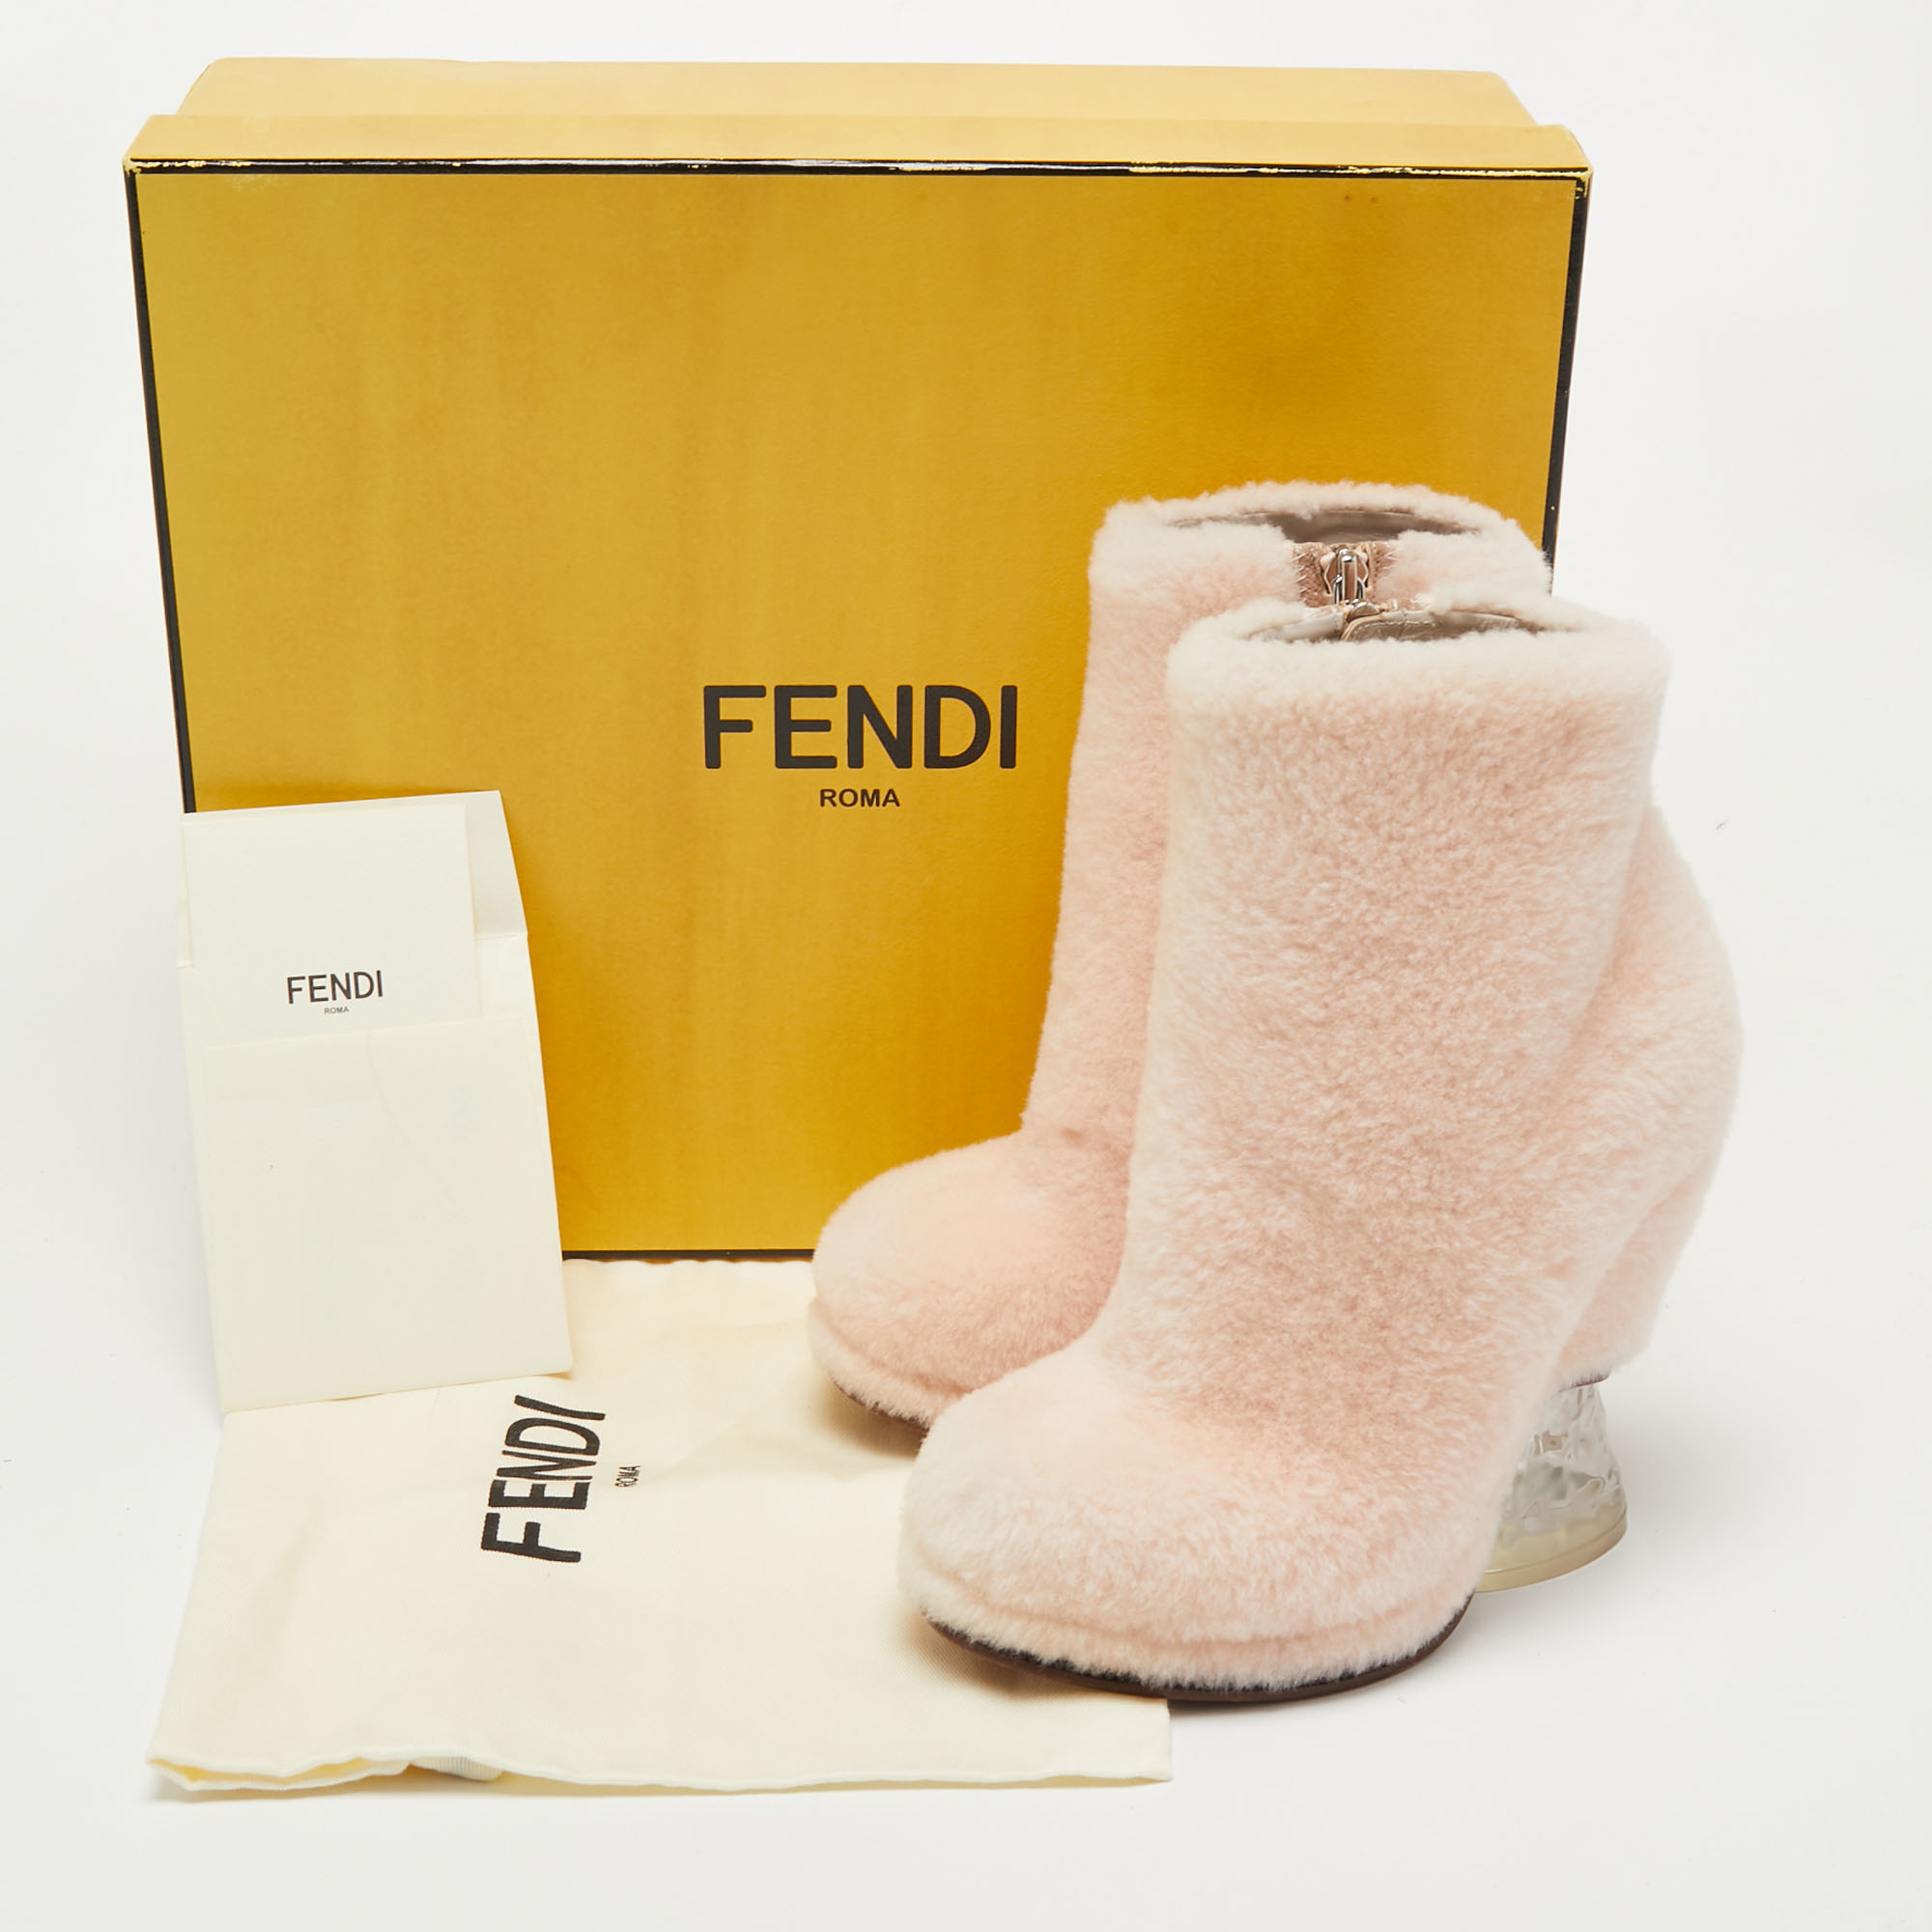 Fendi Light Pink Shearling Ice Heel Ankle Length Boots Size 36